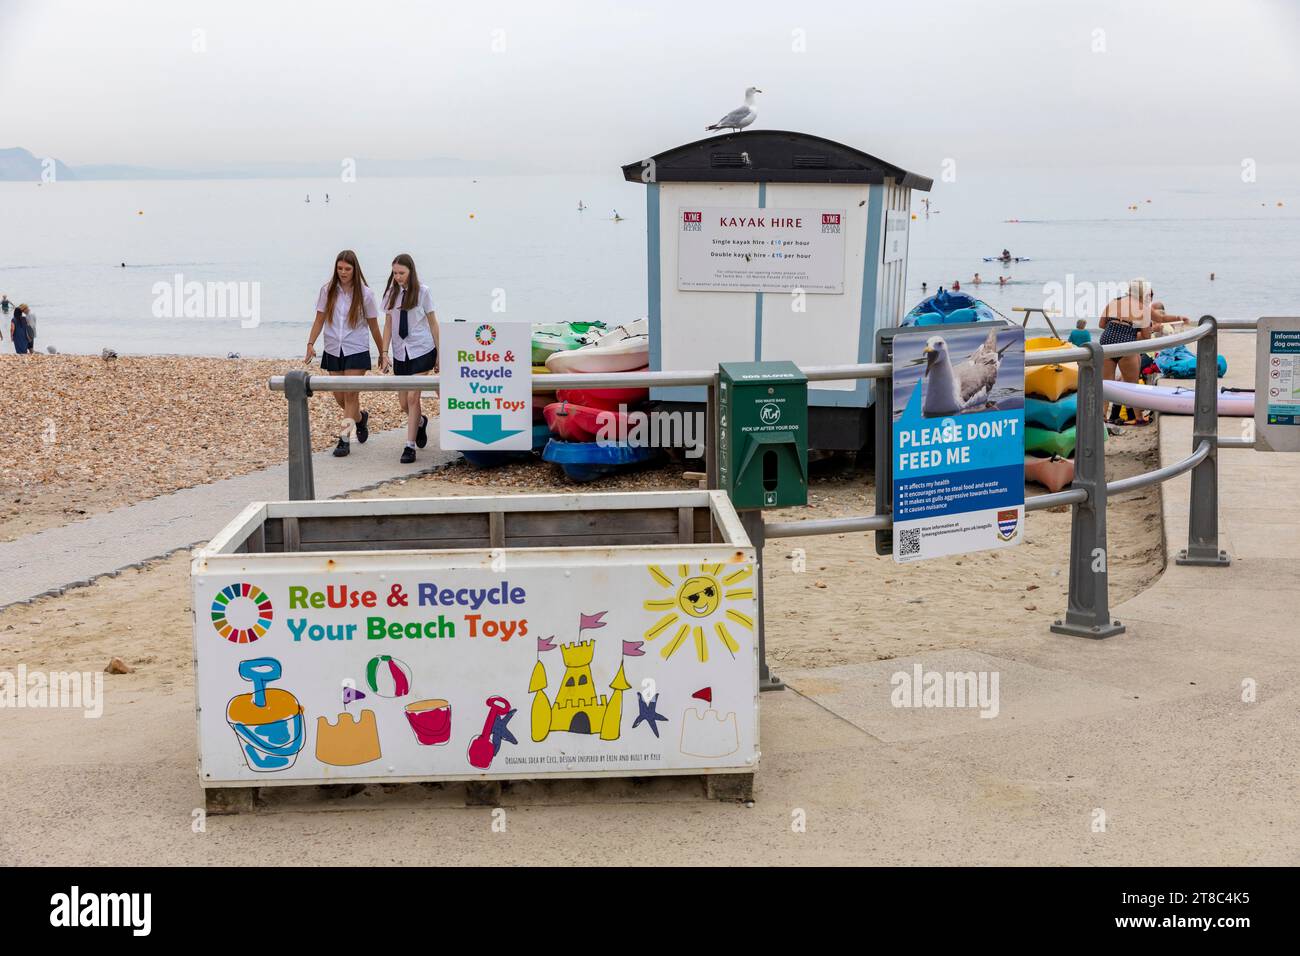 Lyme Regis beachfront, timber box for collection of beach toys for reuse and recycling to avoid waste and landfill, England,UK,2023 Stock Photo